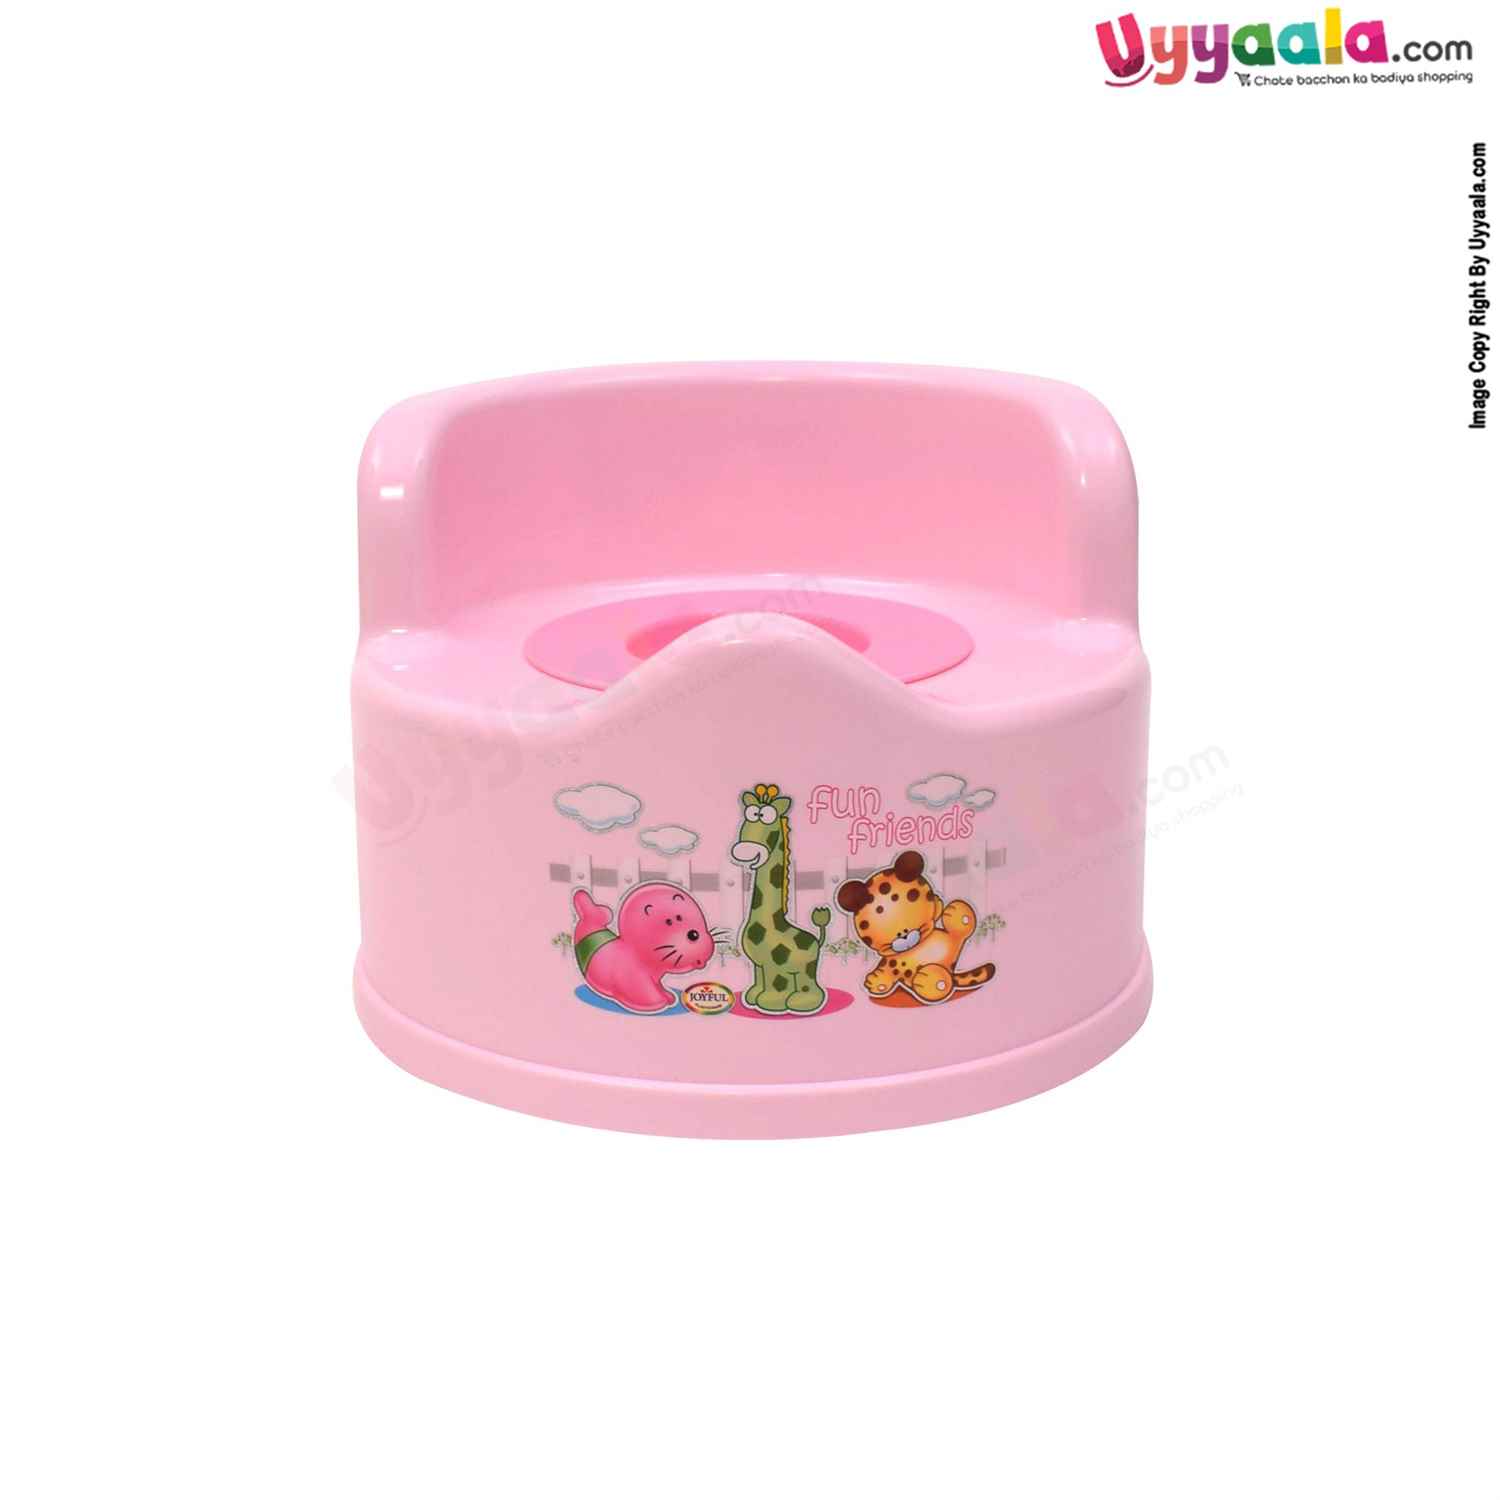 JOYFUL Baby Potty Training Seat with Lid for 5+m Age - Pink